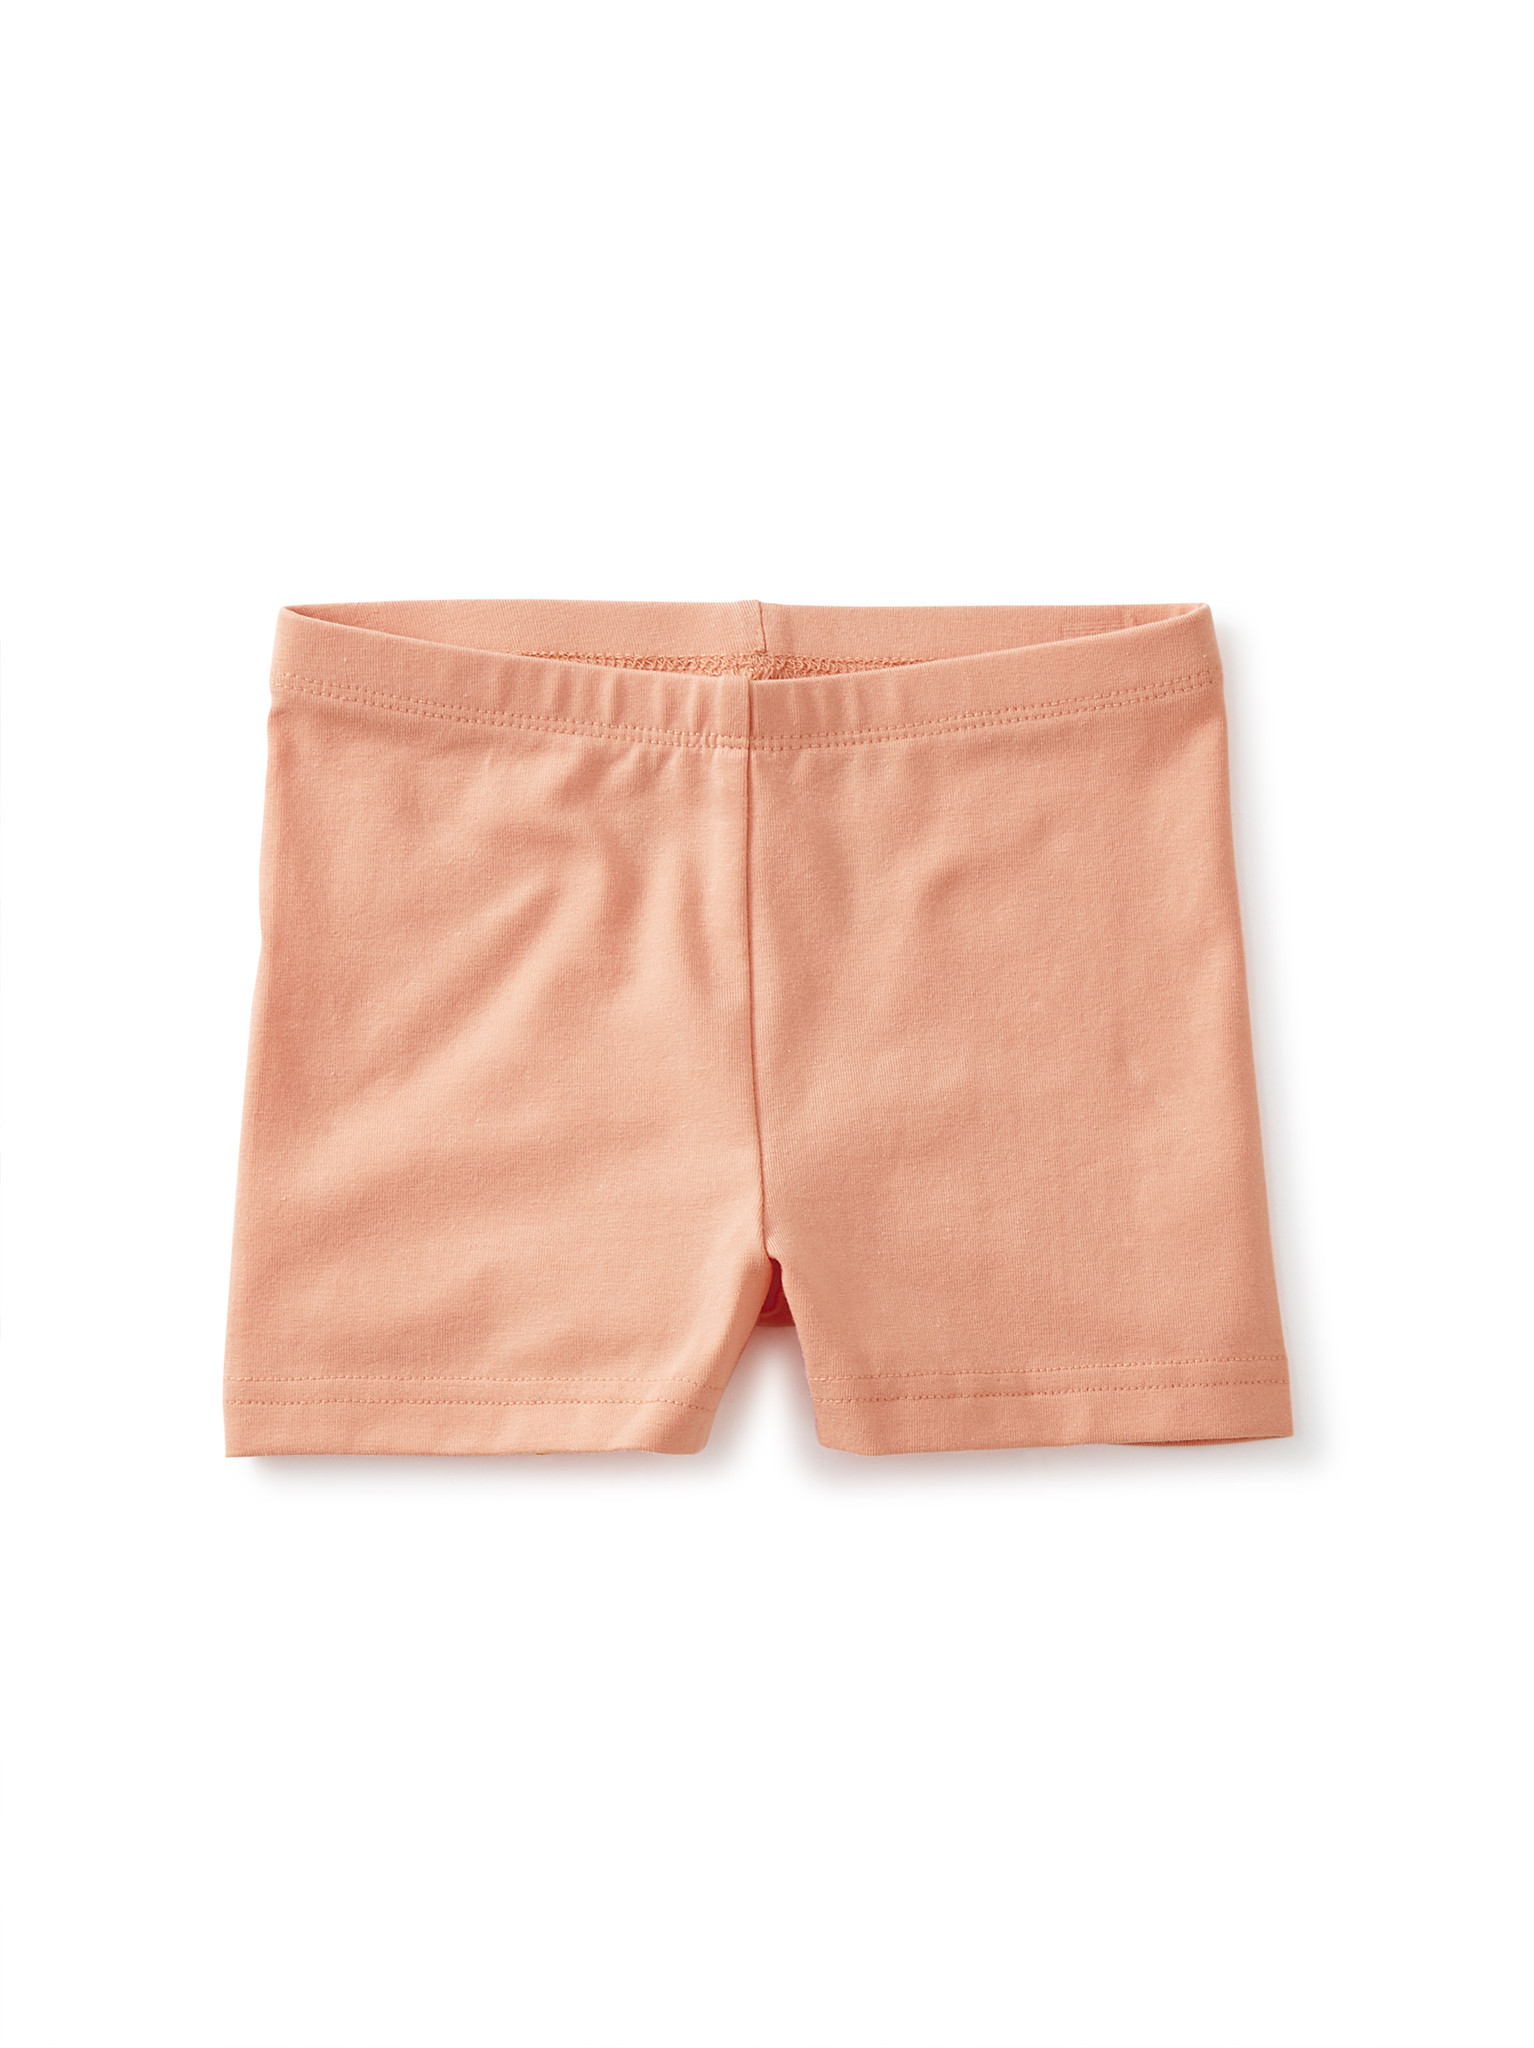 Tea Collection Somersault Shorts - Peach